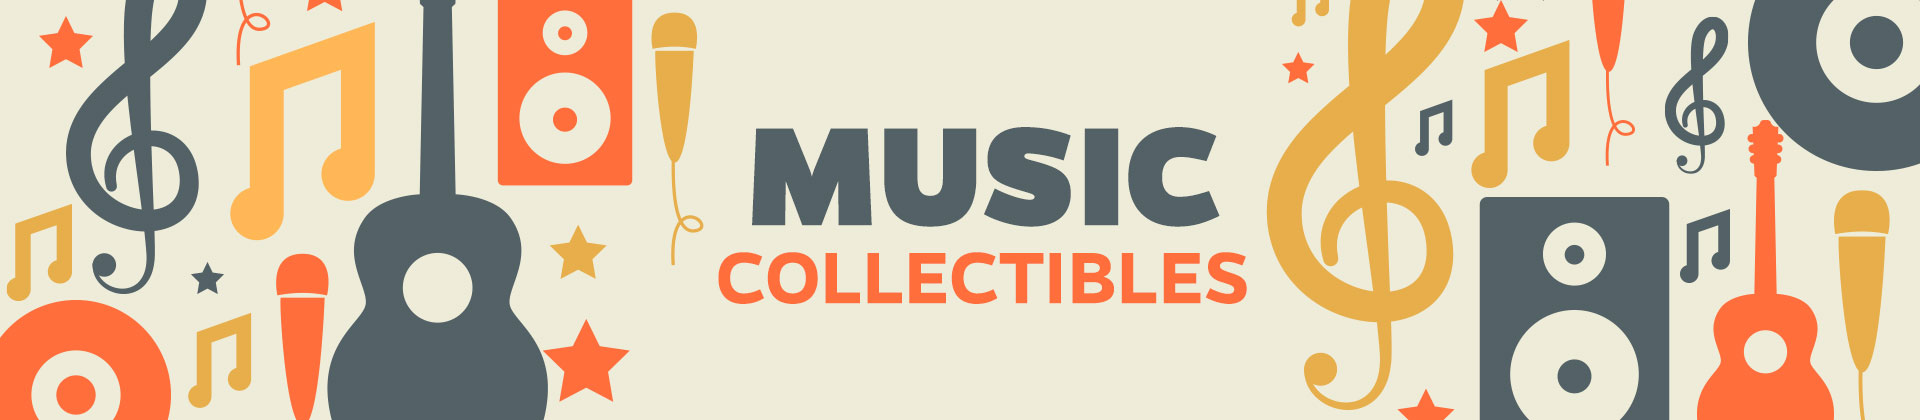 Music Collectibles